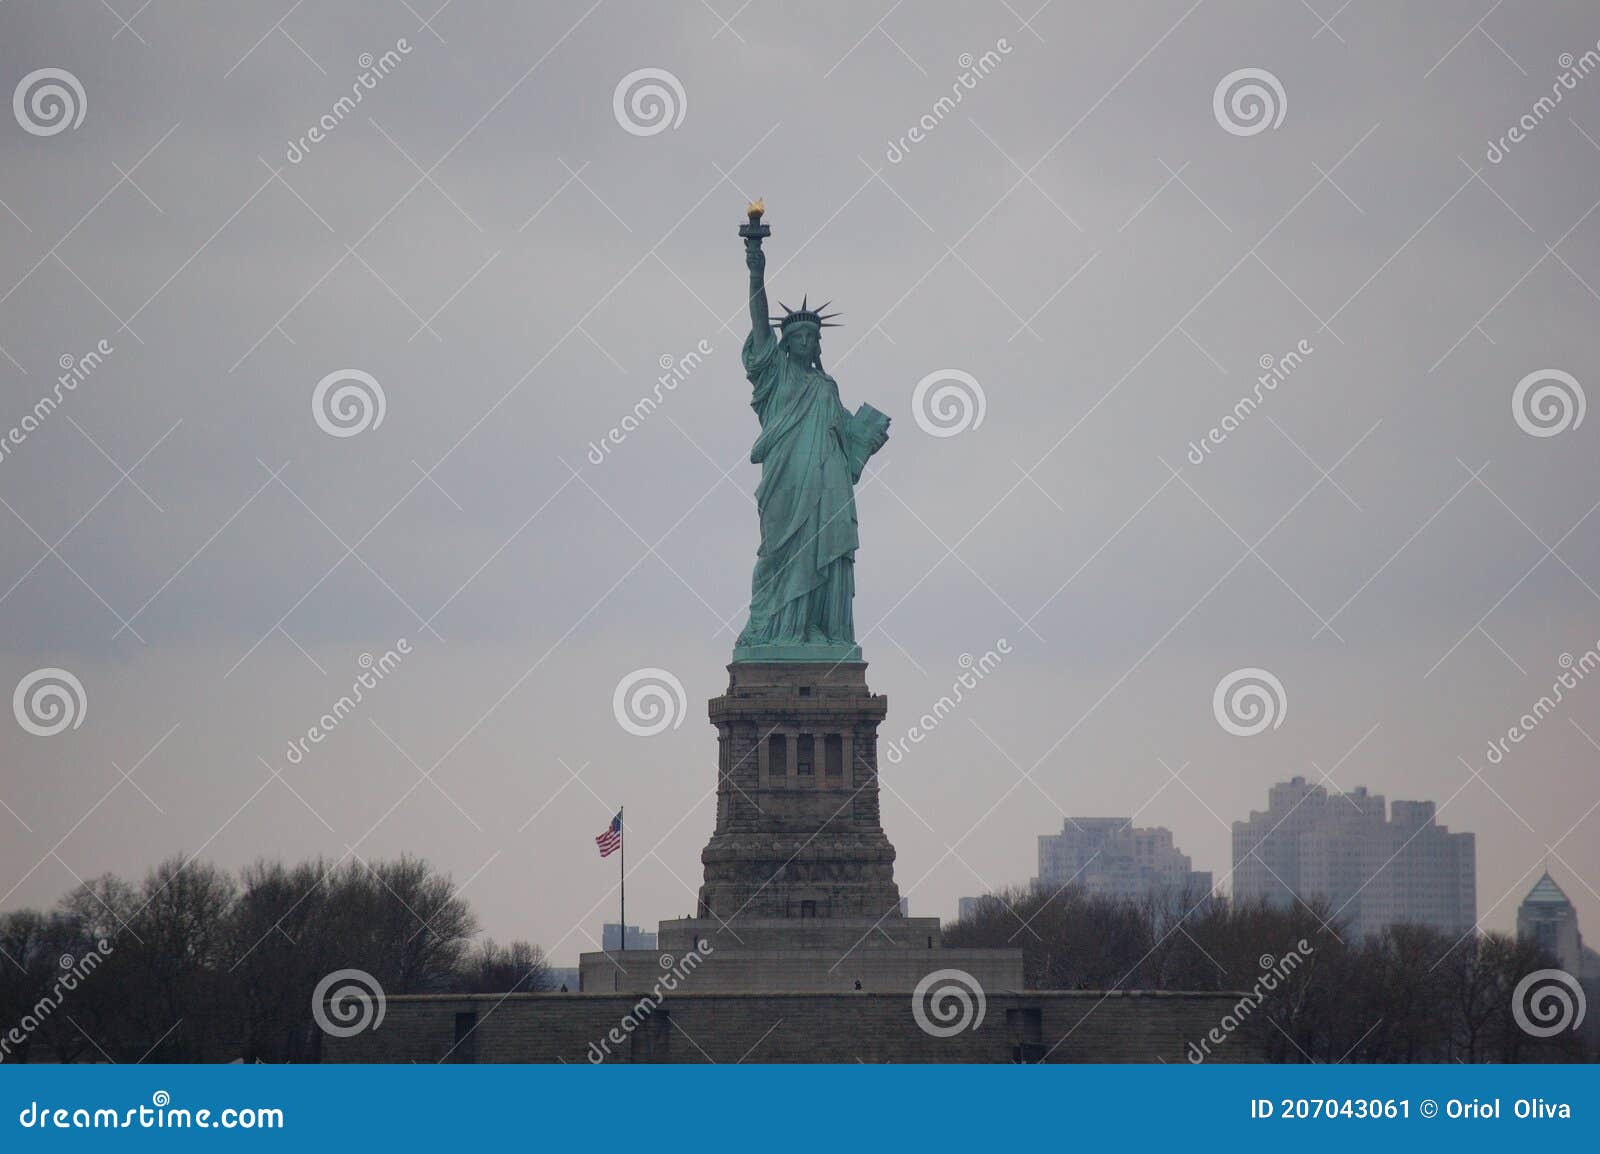 view of the most emblematic buildings and skyscrapers of manhattan (new york). statue of liberty